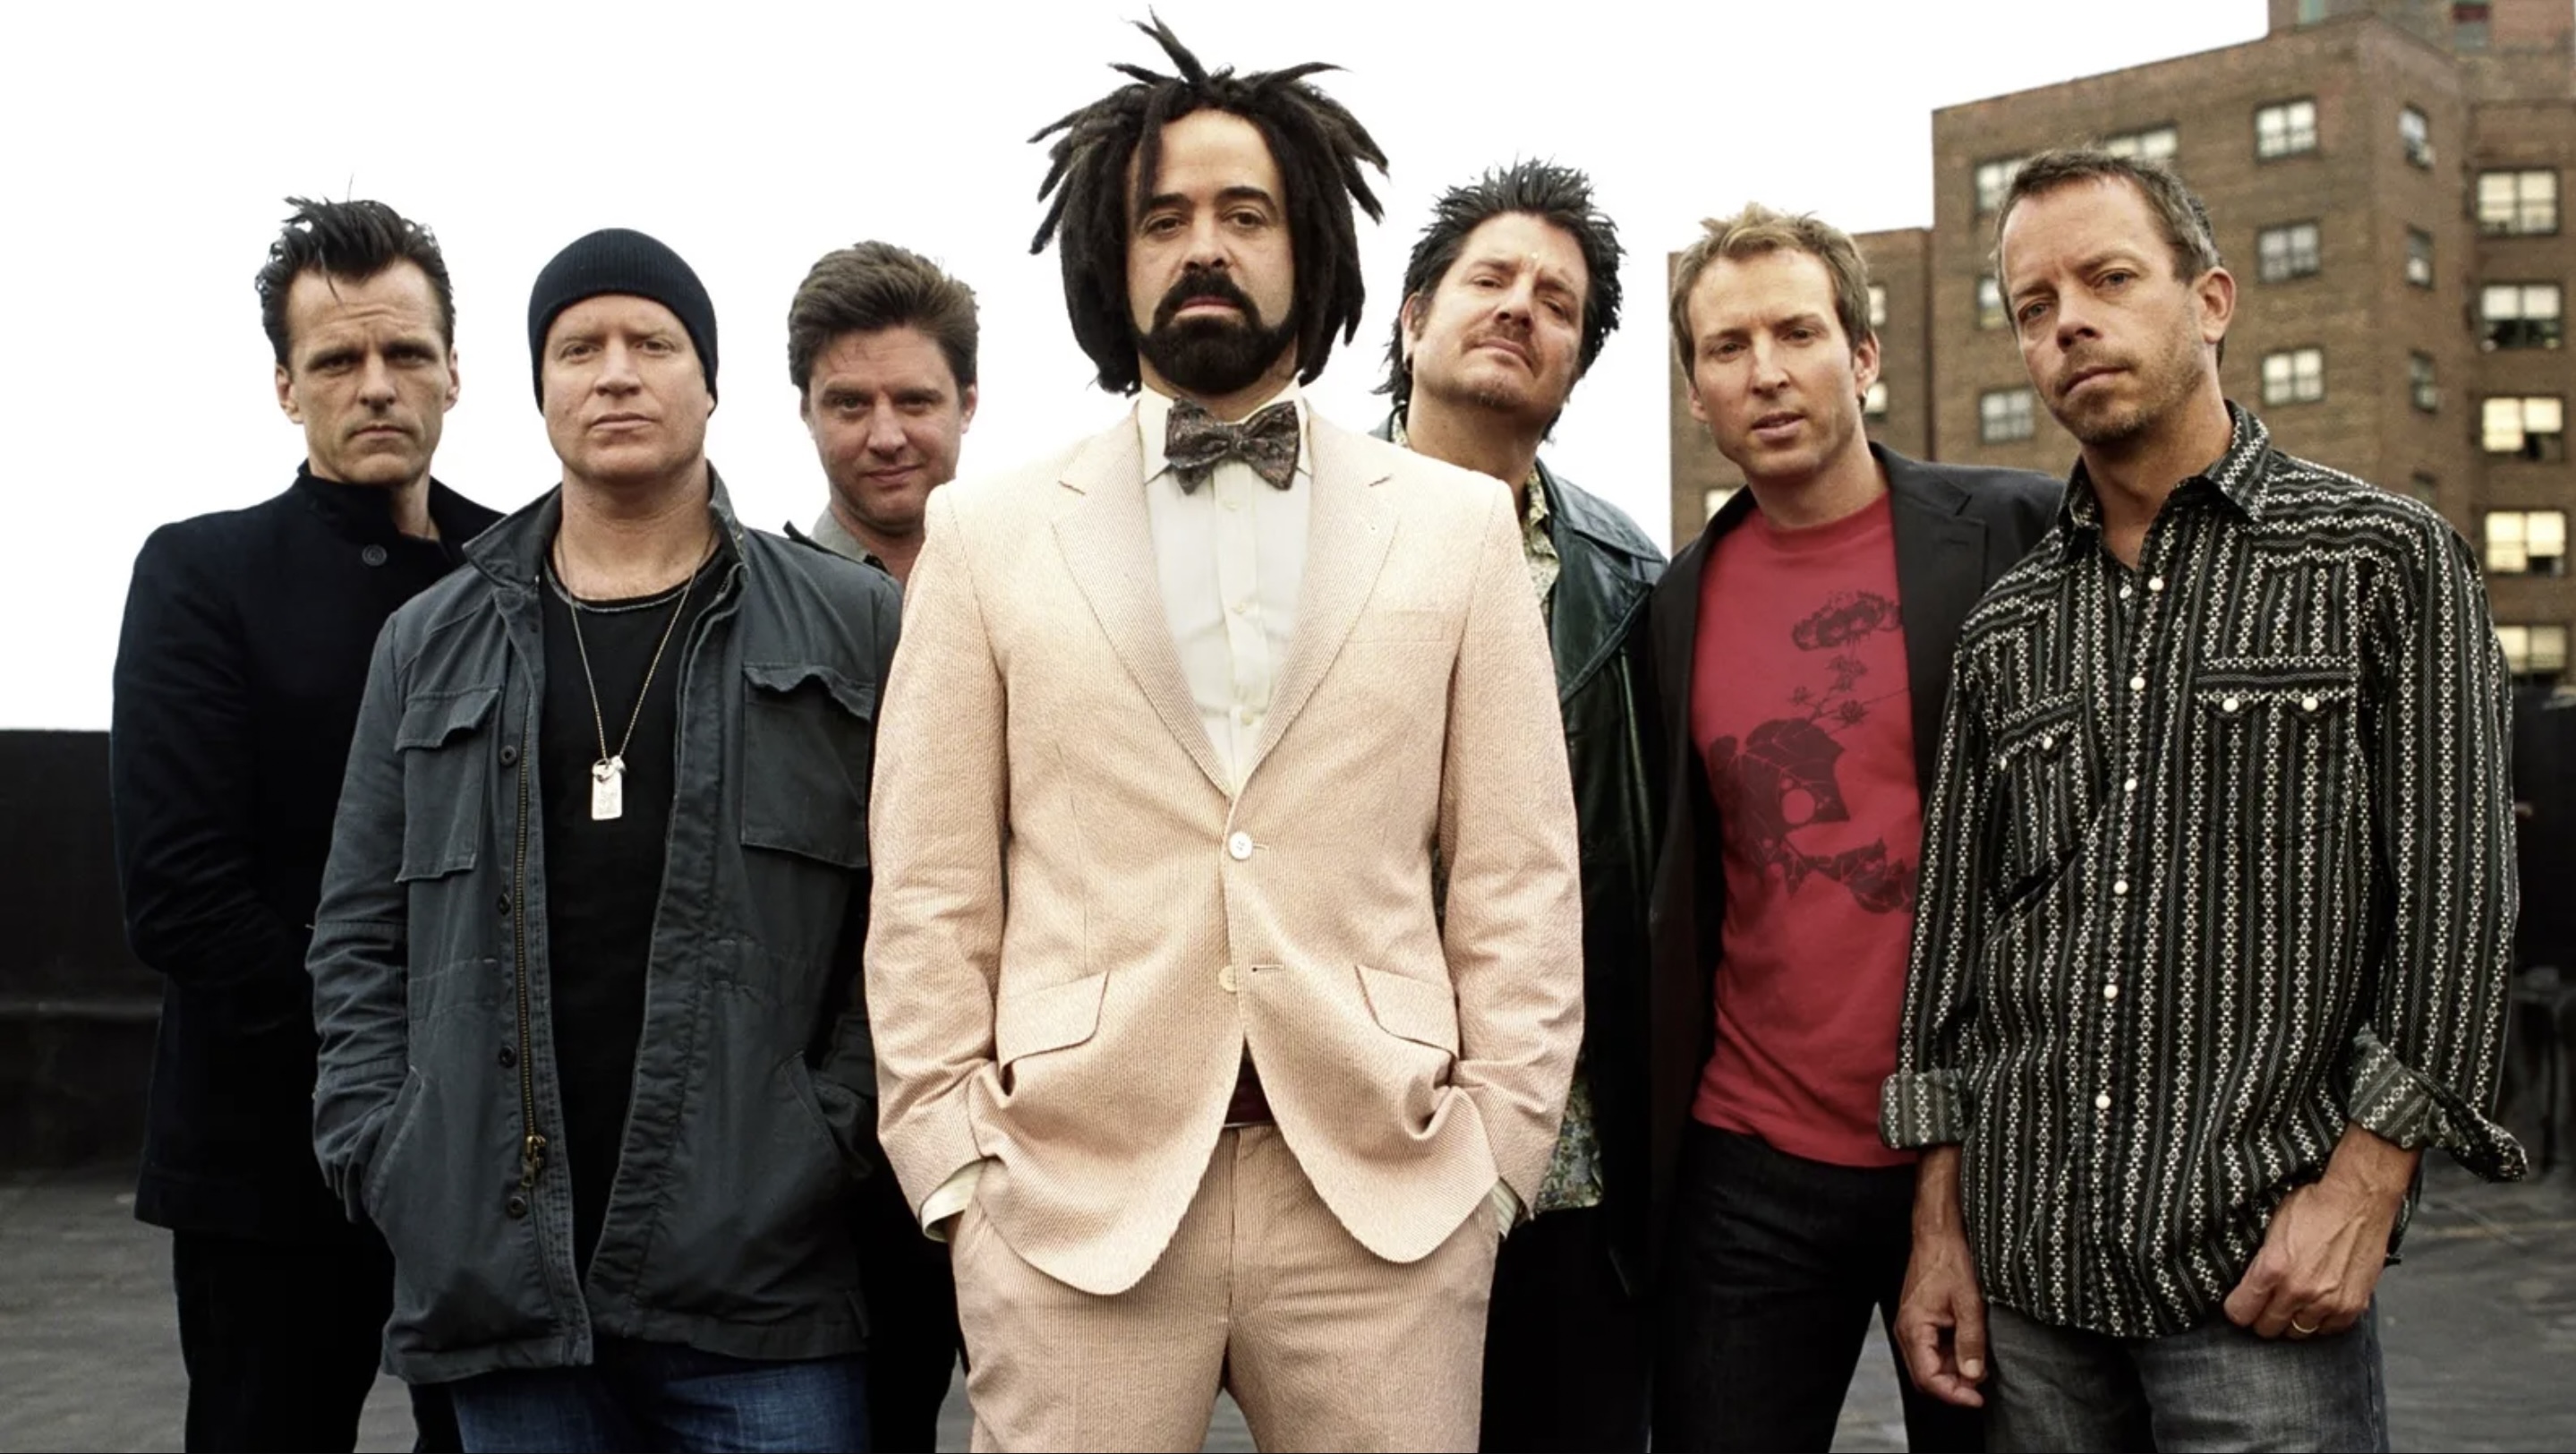 Buy tickets to watch the Counting Crows in Sydney in 2023